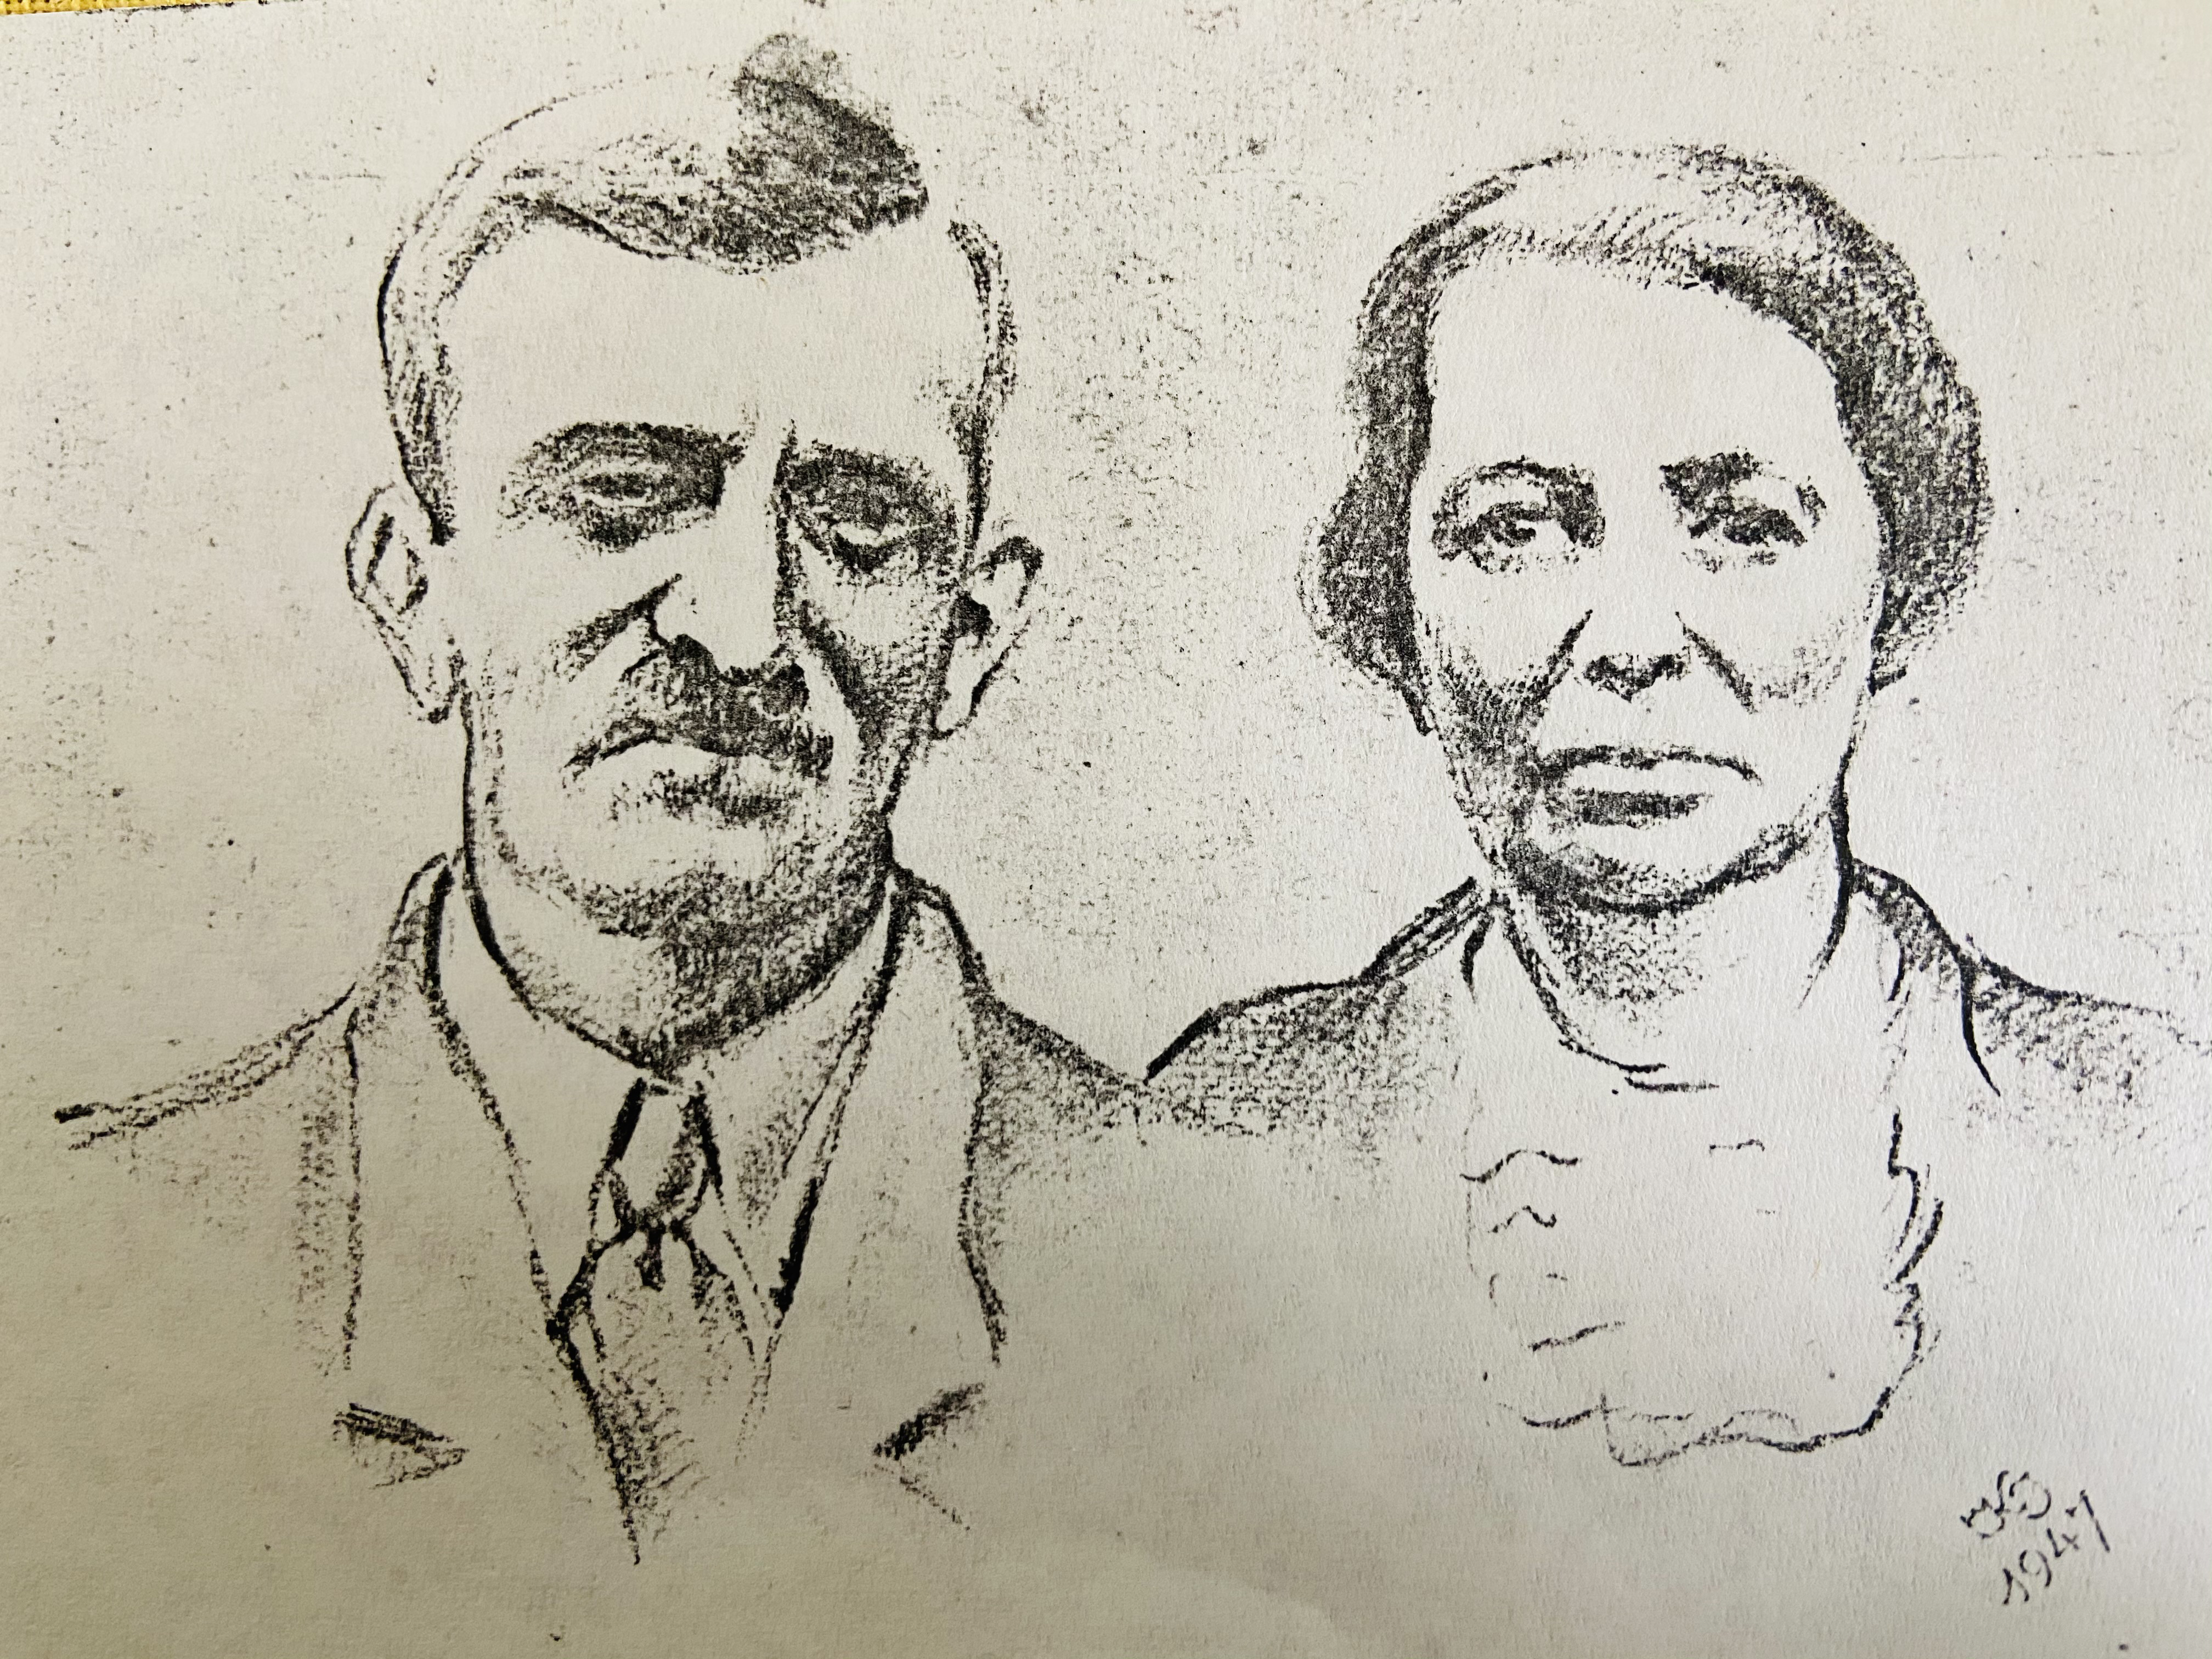 A portrait of Esther Kahn's parents, drawn by her older sister in the post-war period.